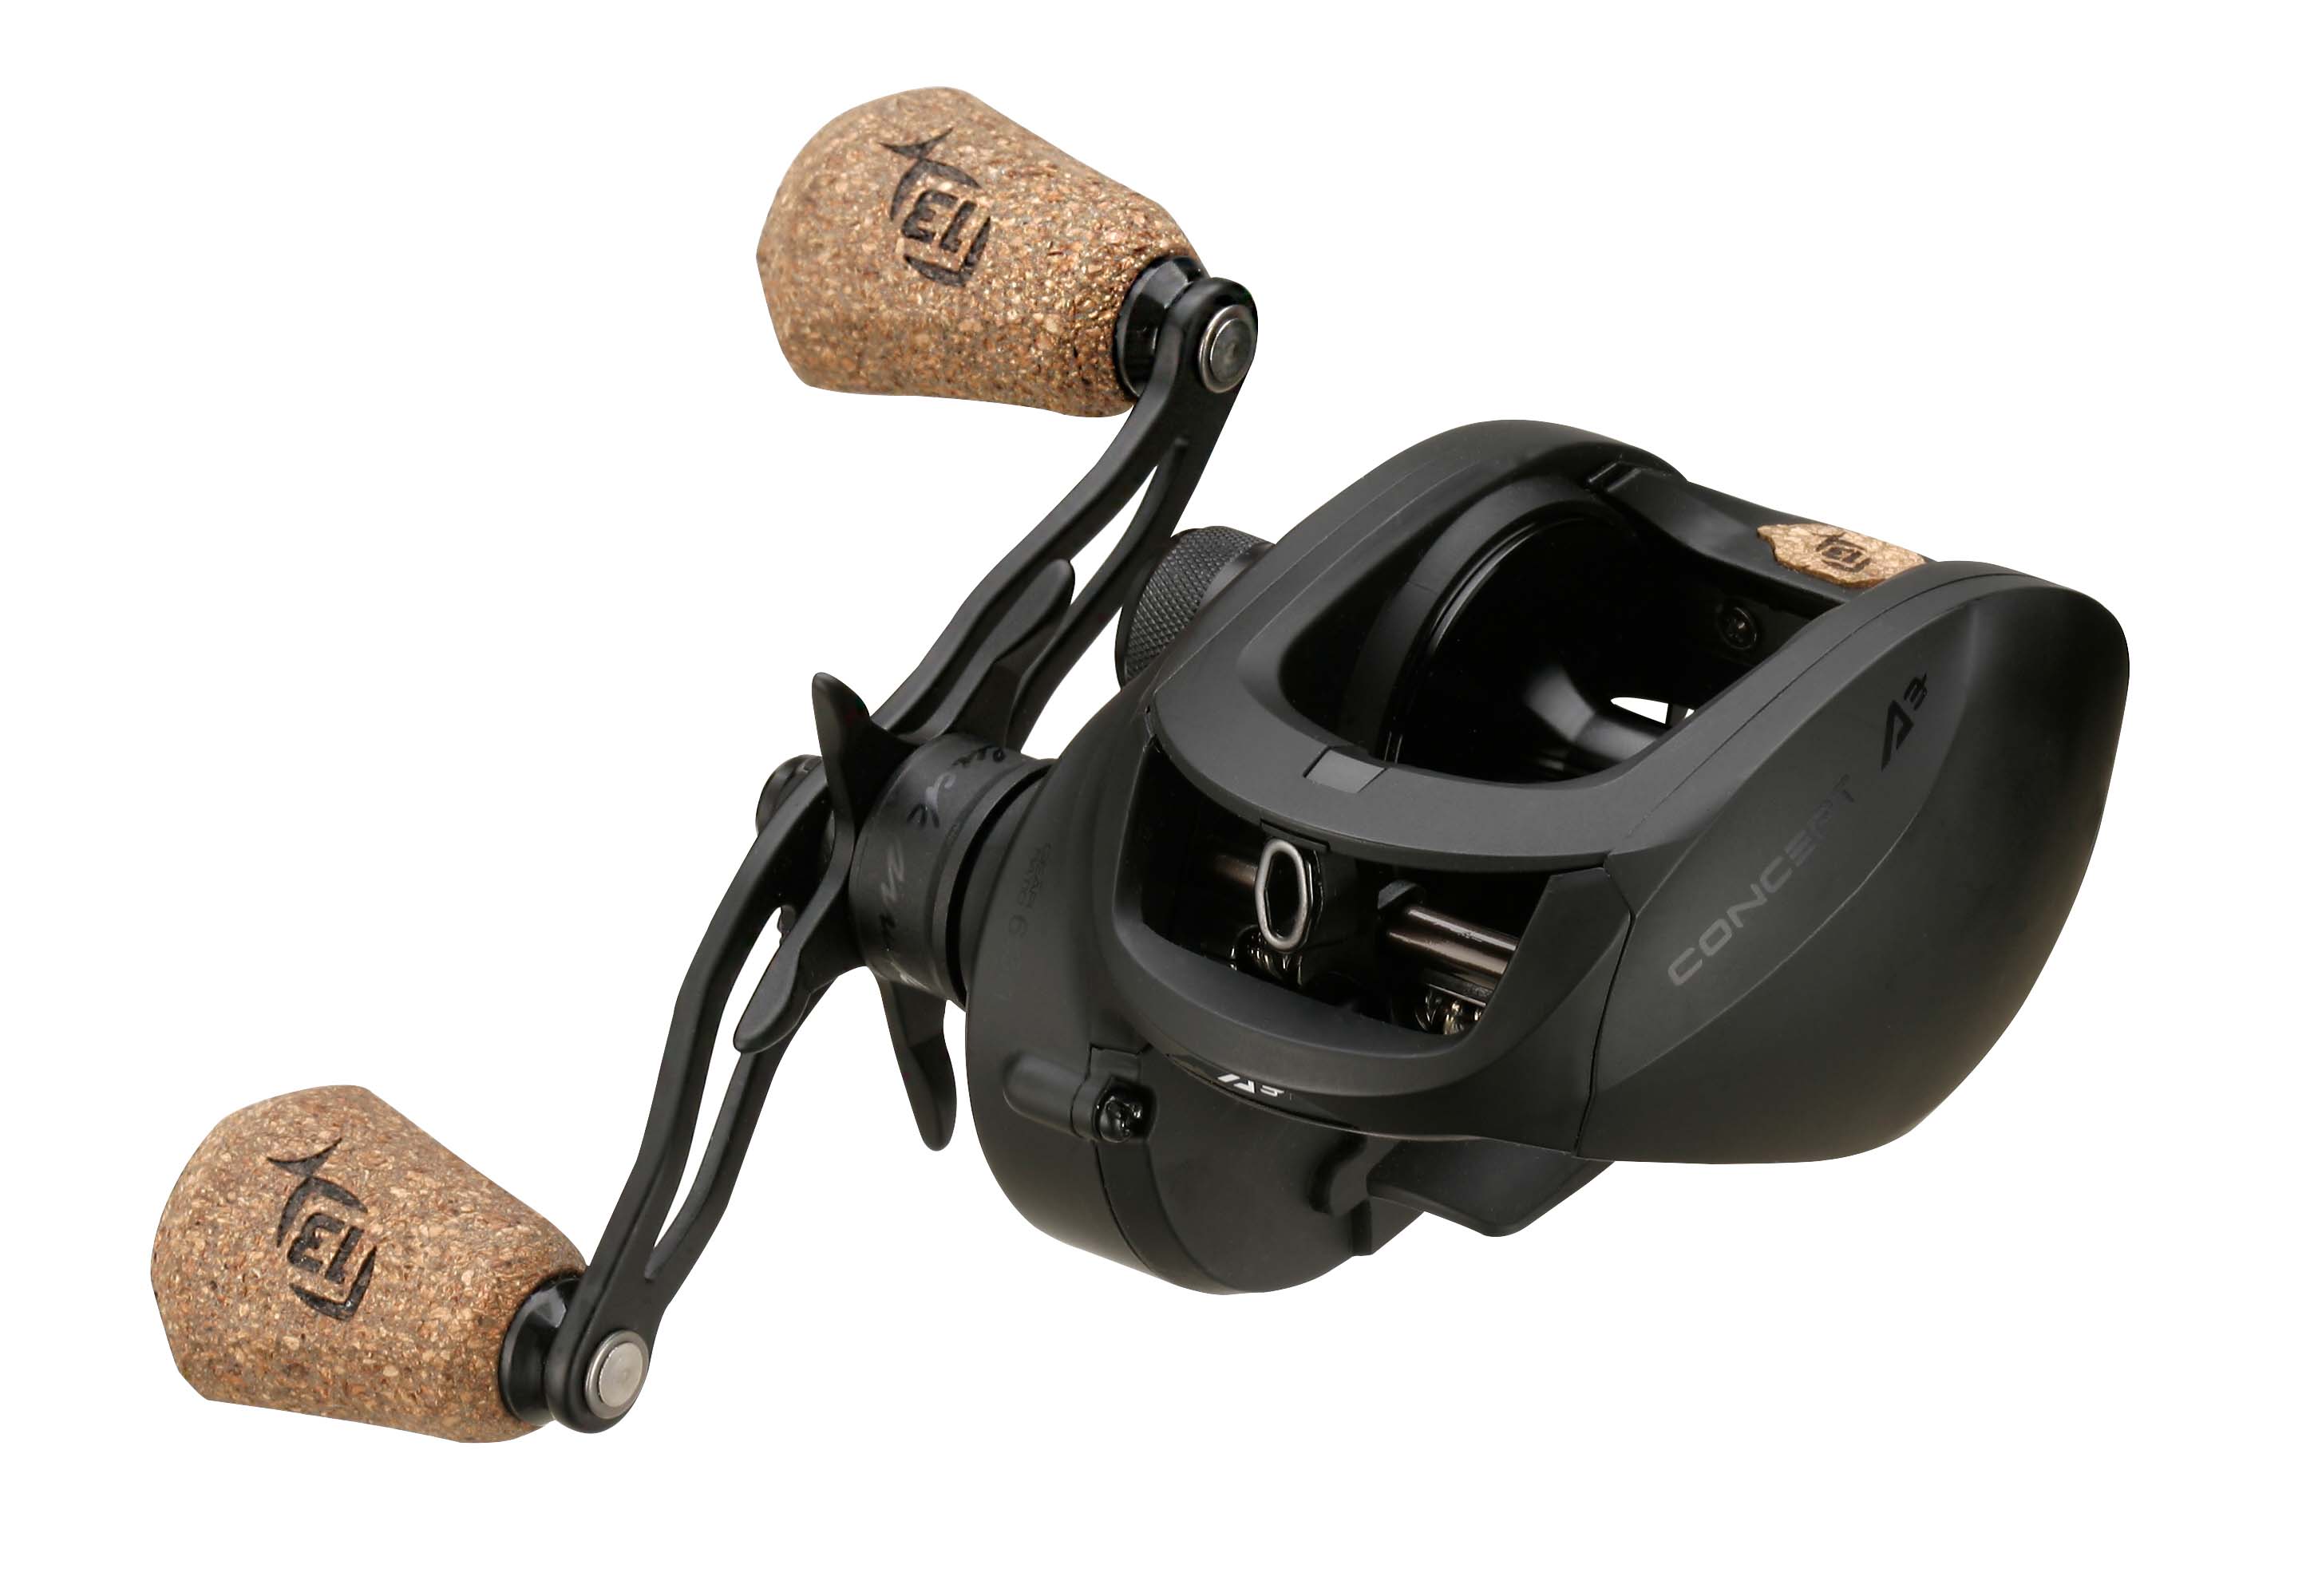 13 Fishing Concept A3 8.1:1 Baitcast Reel  Up to 16% Off w/ Free Shipping  and Handling